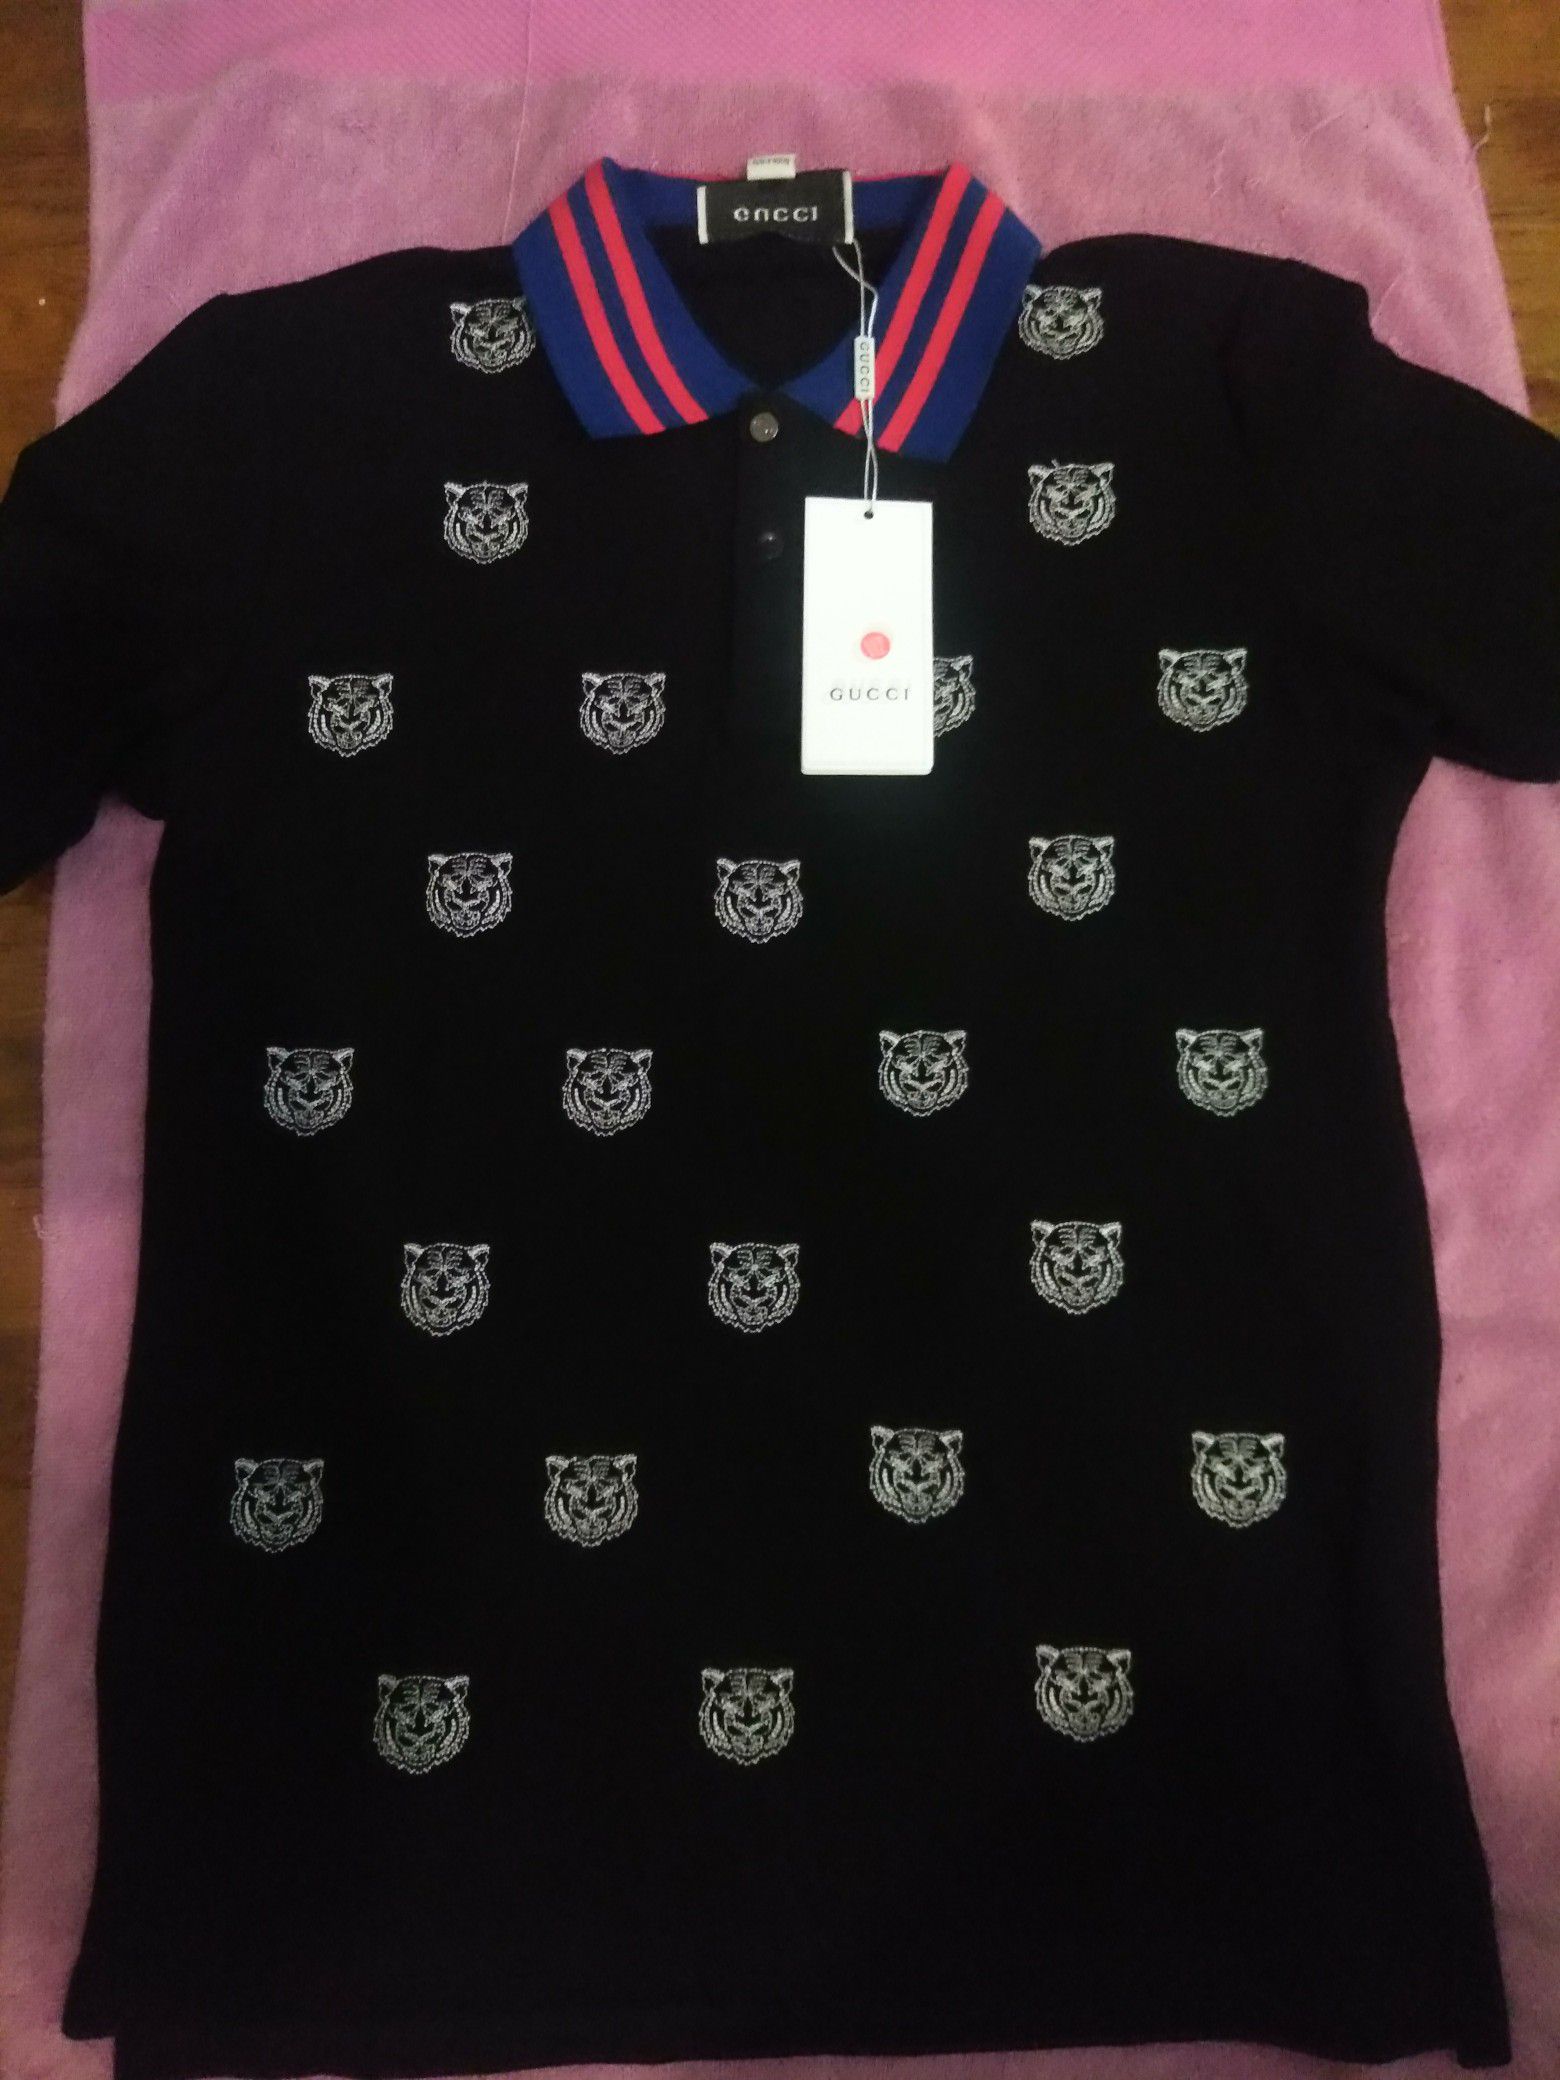 Gucci polo style shirt size large